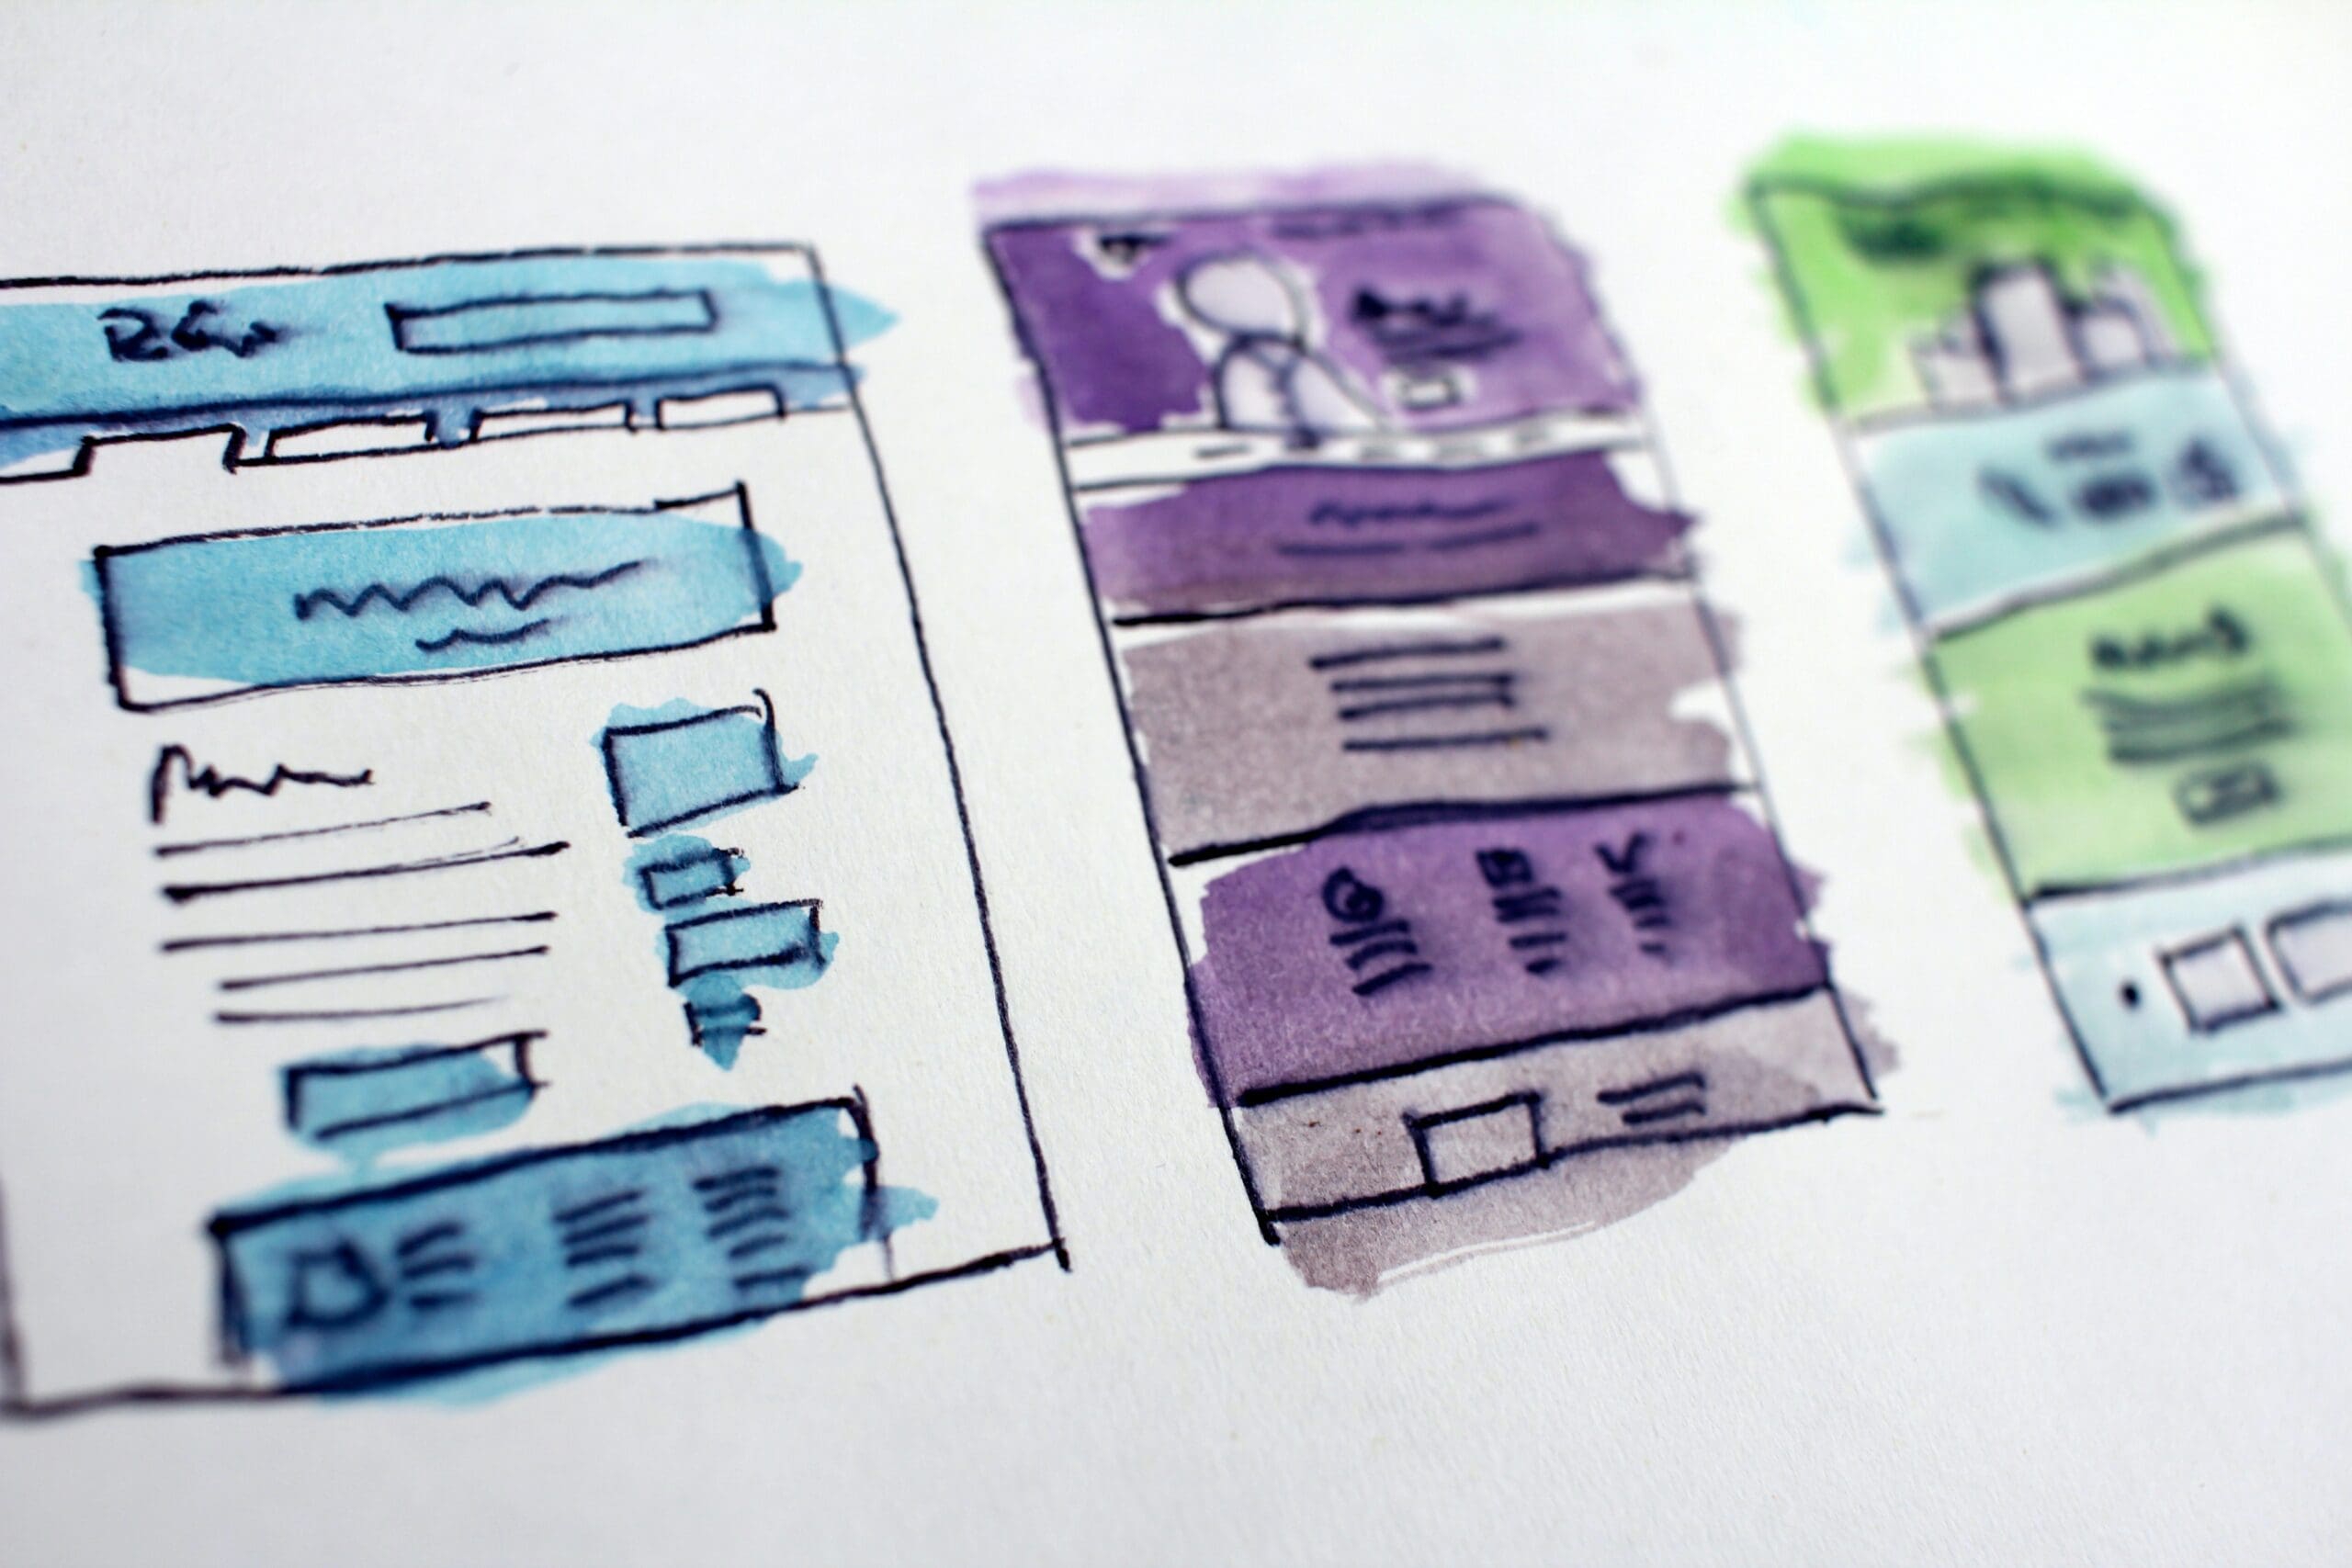 Sketches of a simple web design